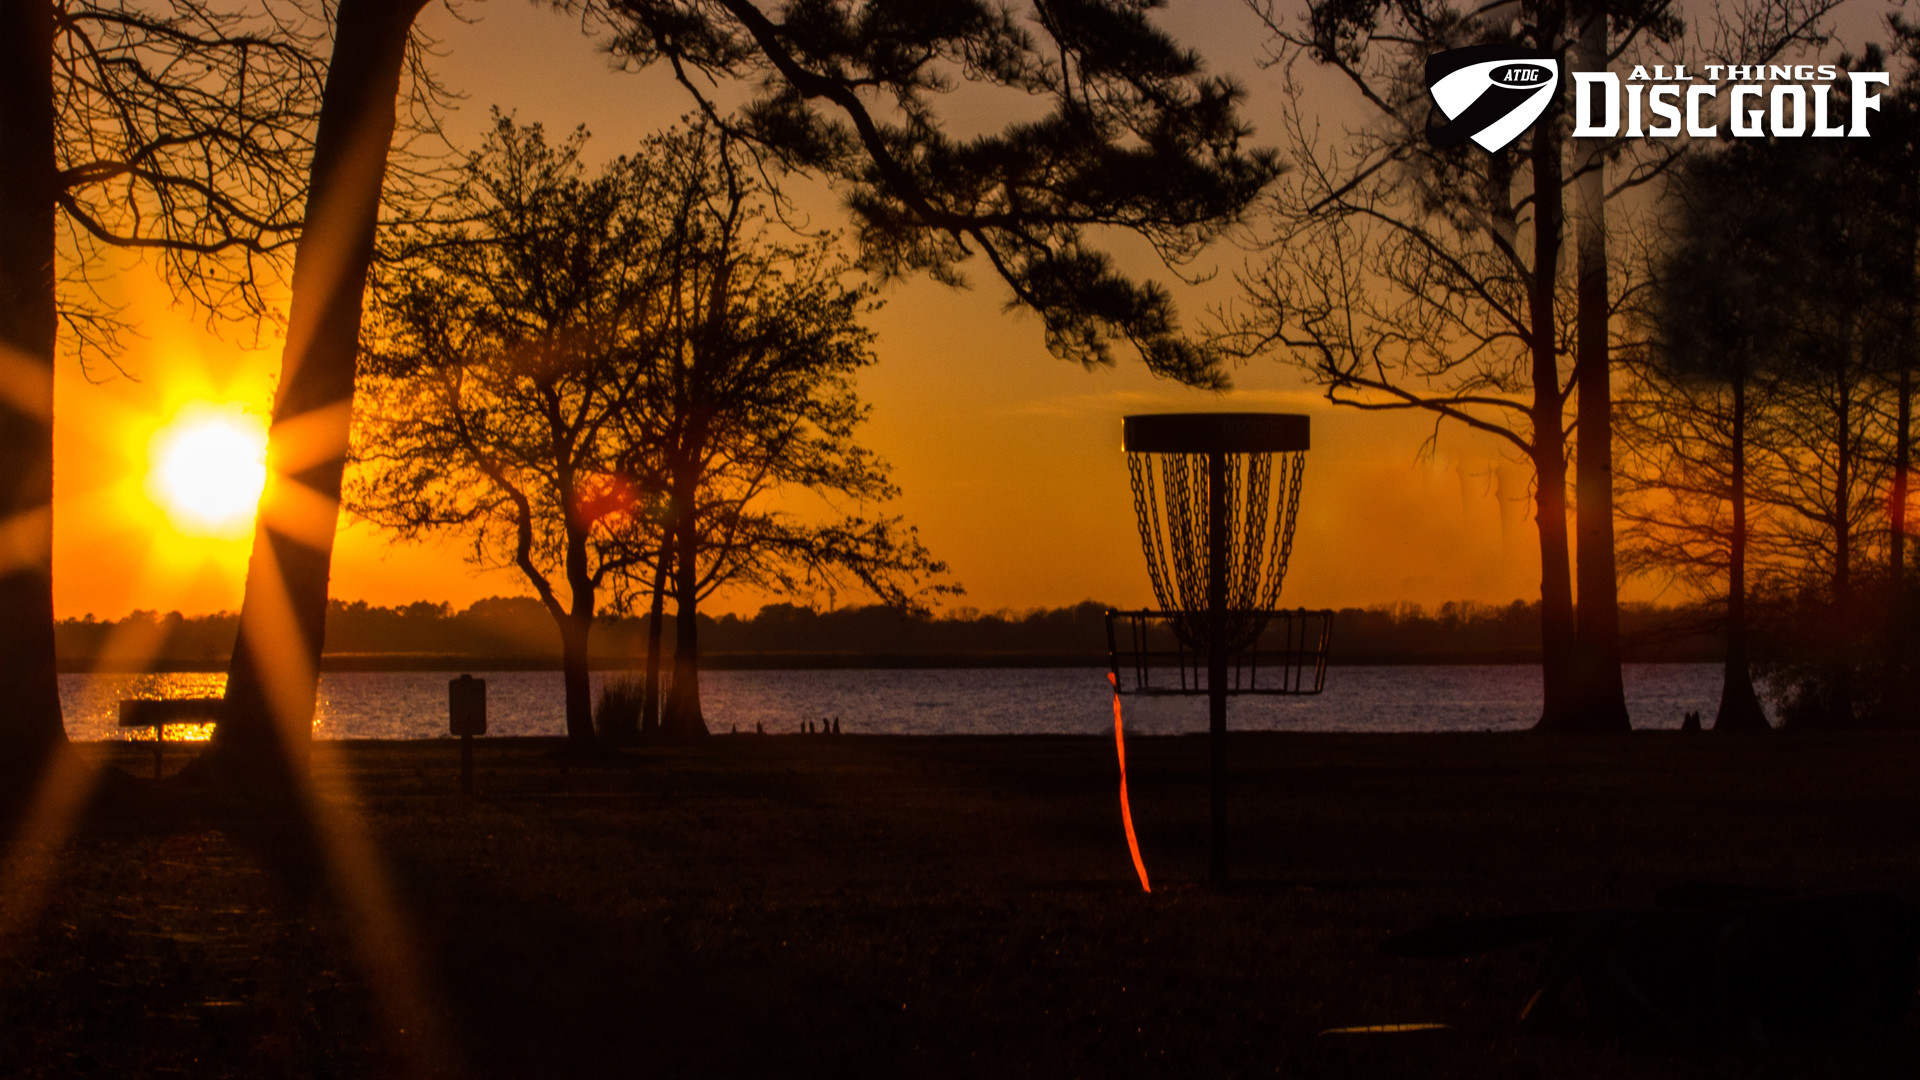 1920x1080 Disc Golf. Backgrounds of Disc Golf in High Definition.  1.512 MB